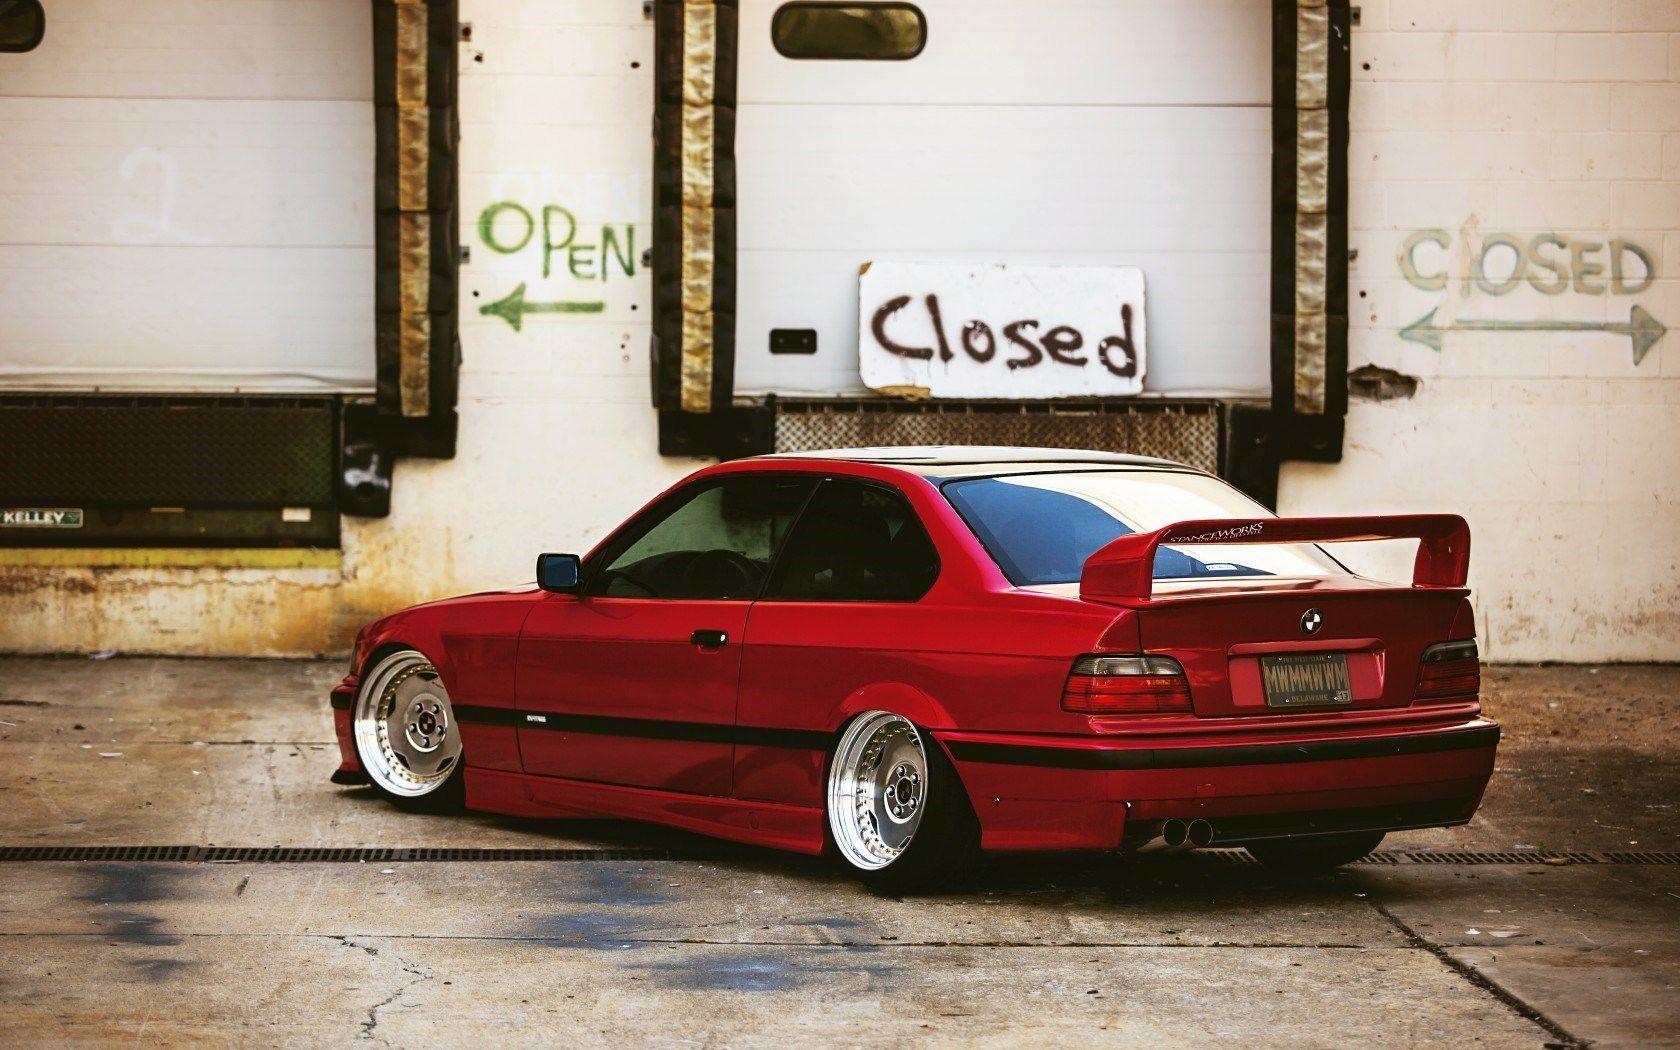 BMW E36 Red Tuning Car Closed Open Signs HD Wallpaper